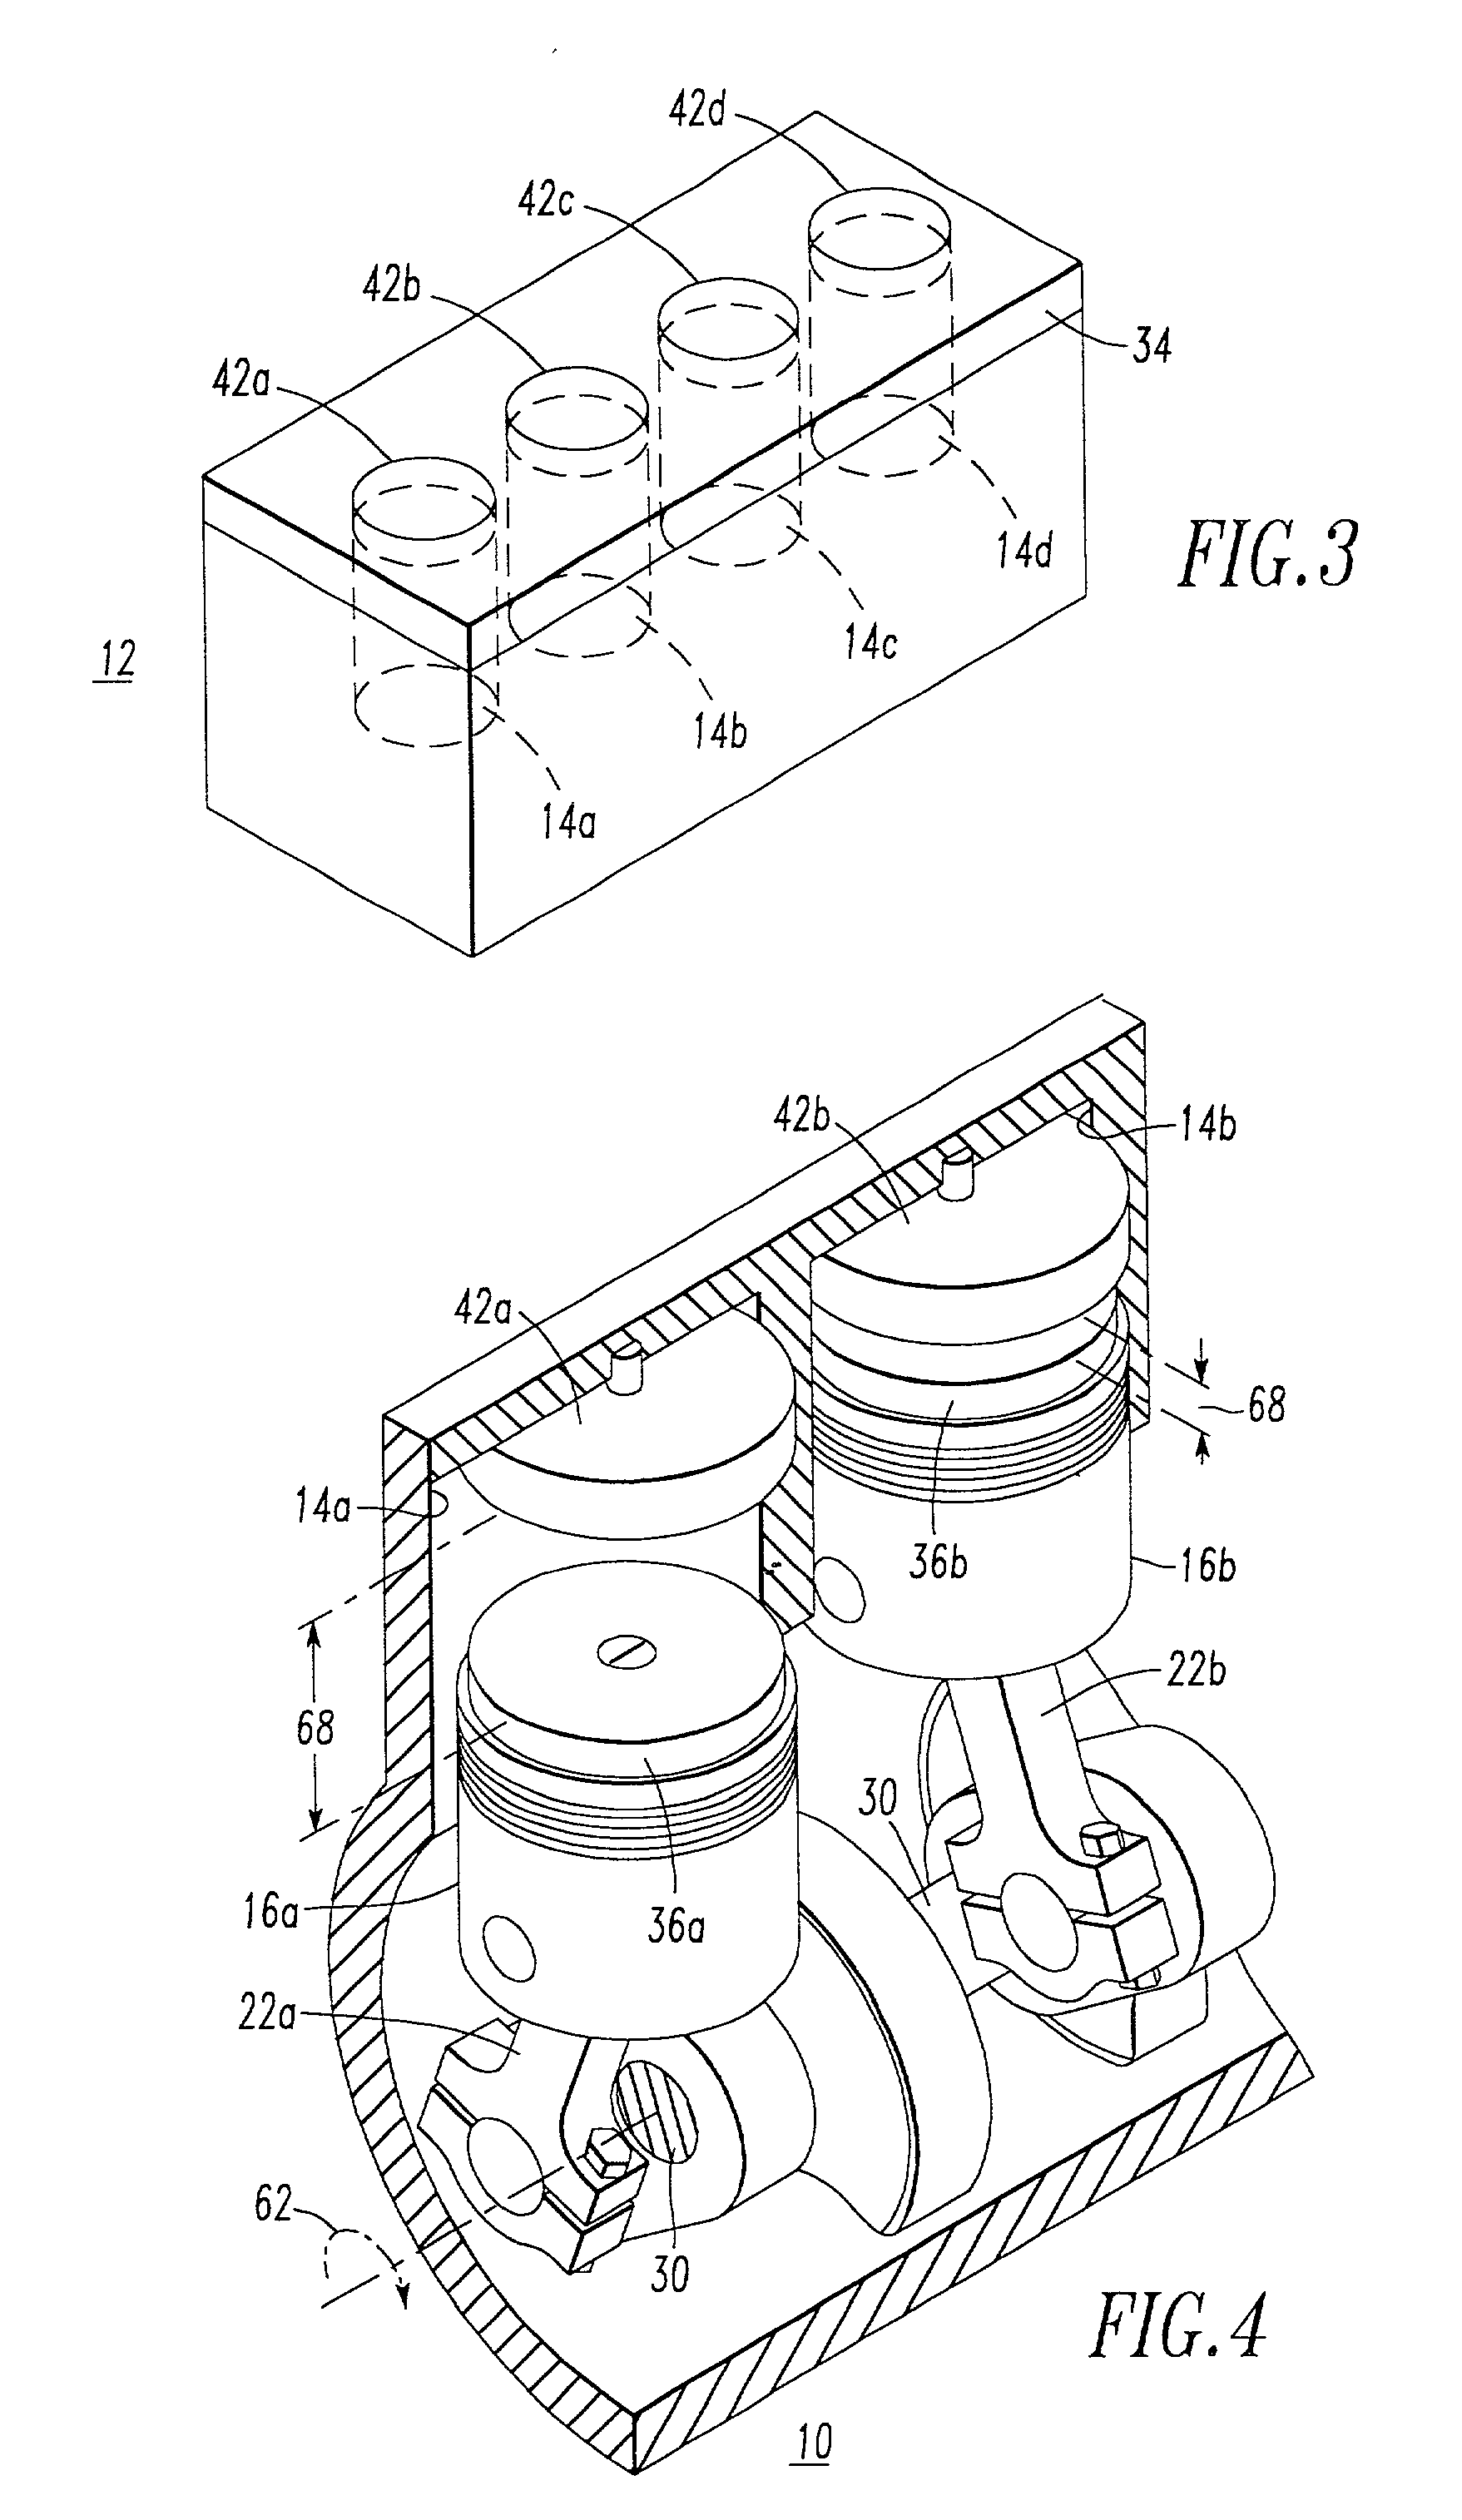 Magnetically powered reciprocating engine